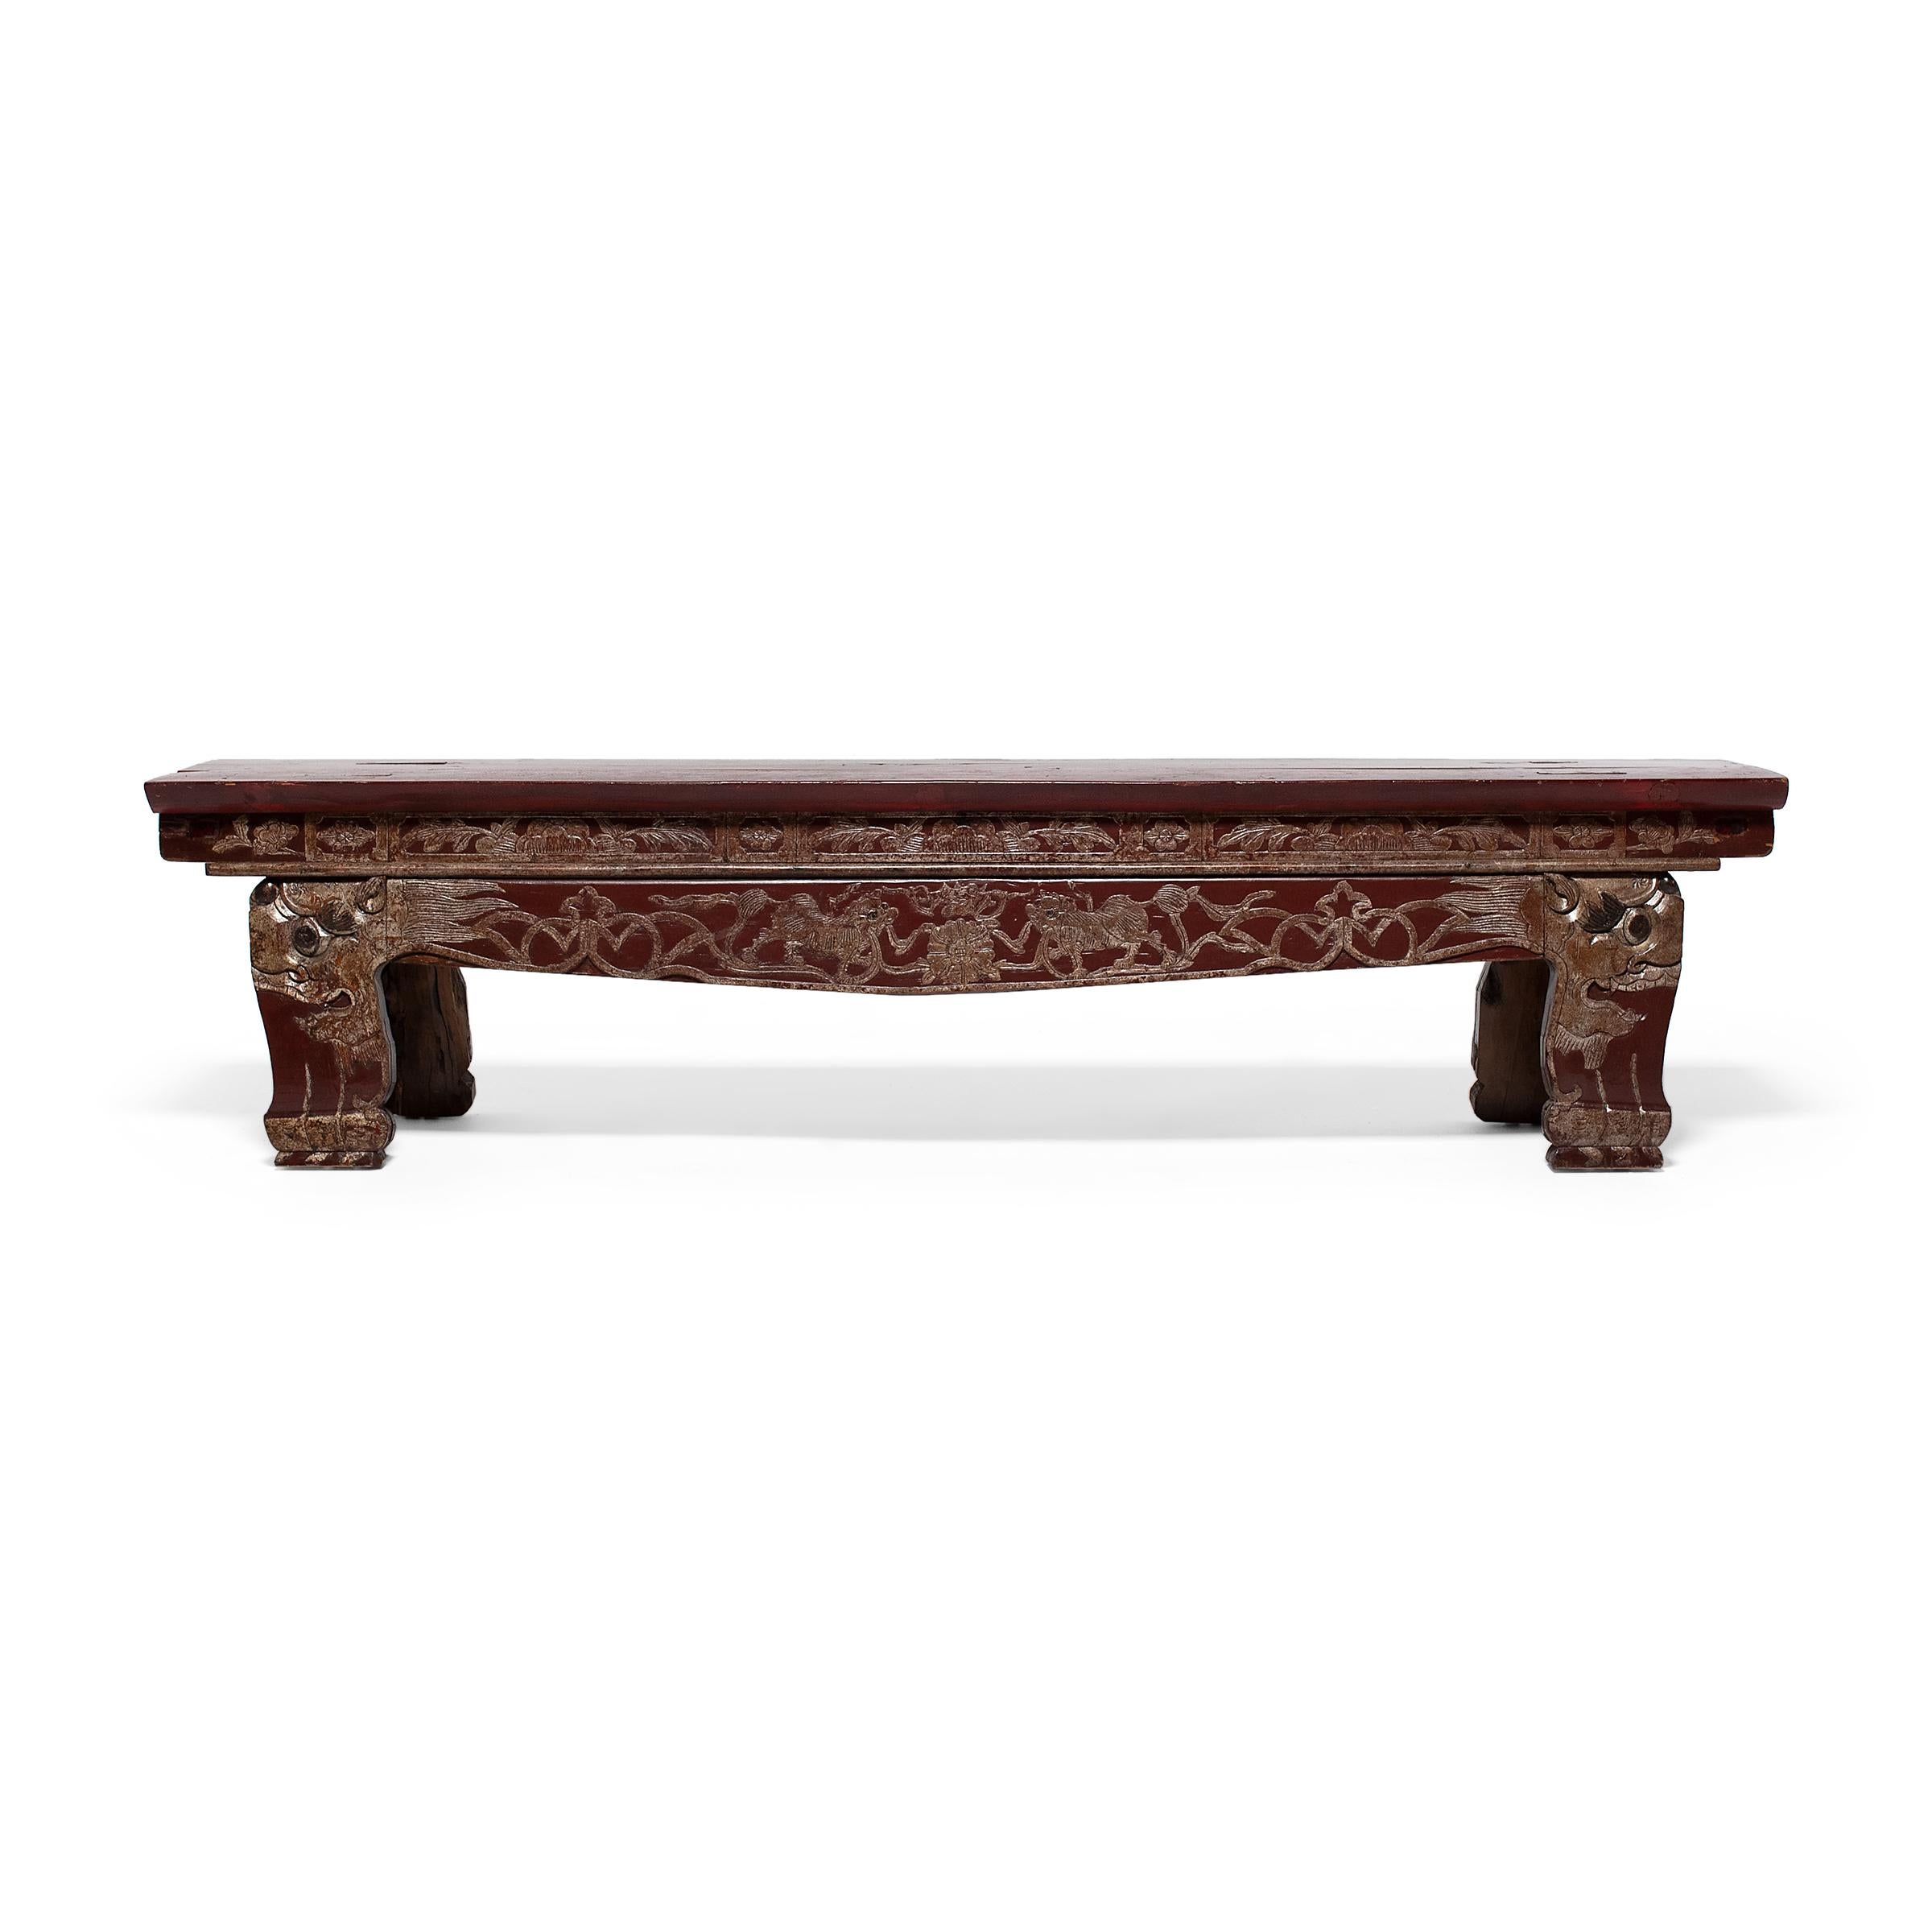 Carved Chinese Lacquered Theater Bench with Dragon Carvings, c. 1850 For Sale